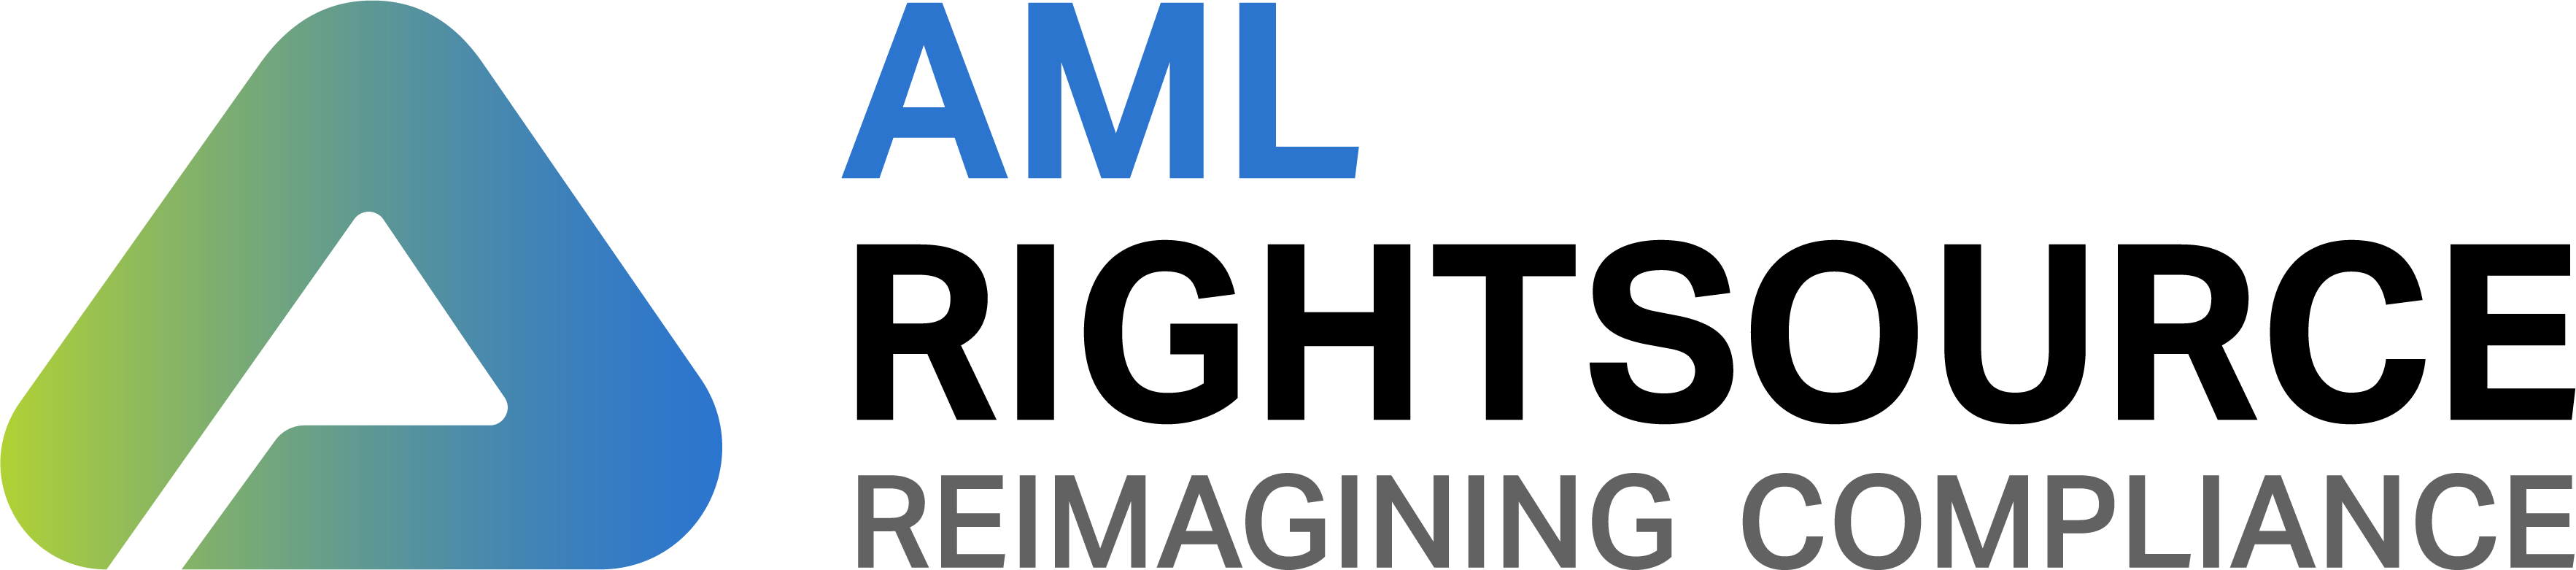 Primary AML RightSource Logo